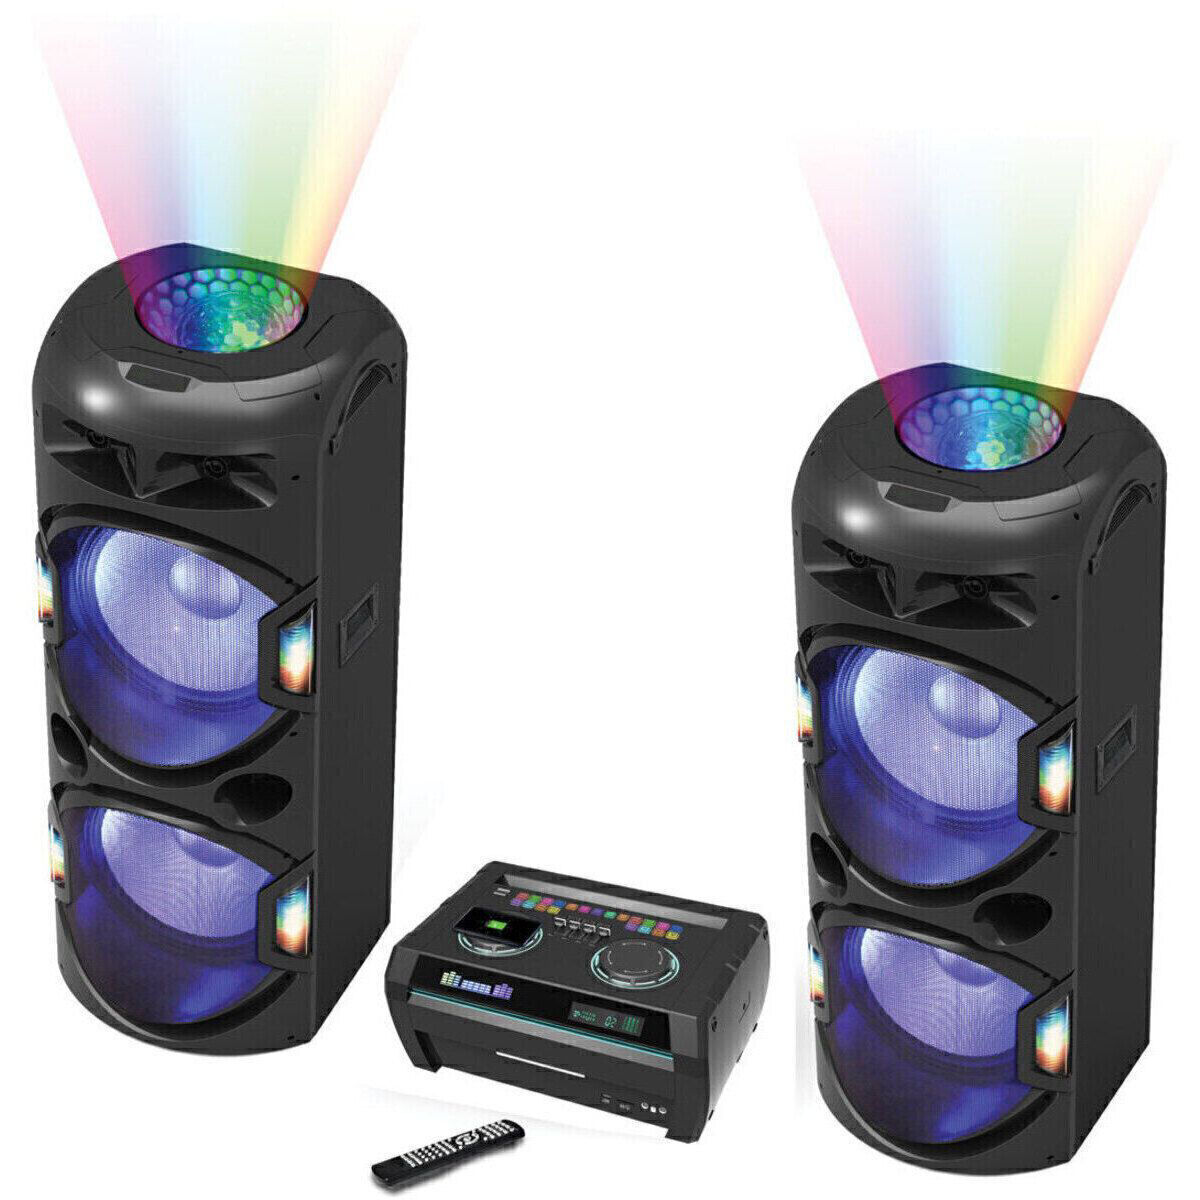 bout Sneeuwwitje Bont EDISON BLUETOOTH STEREO SYSTEM | Badcock Home Furniture &more